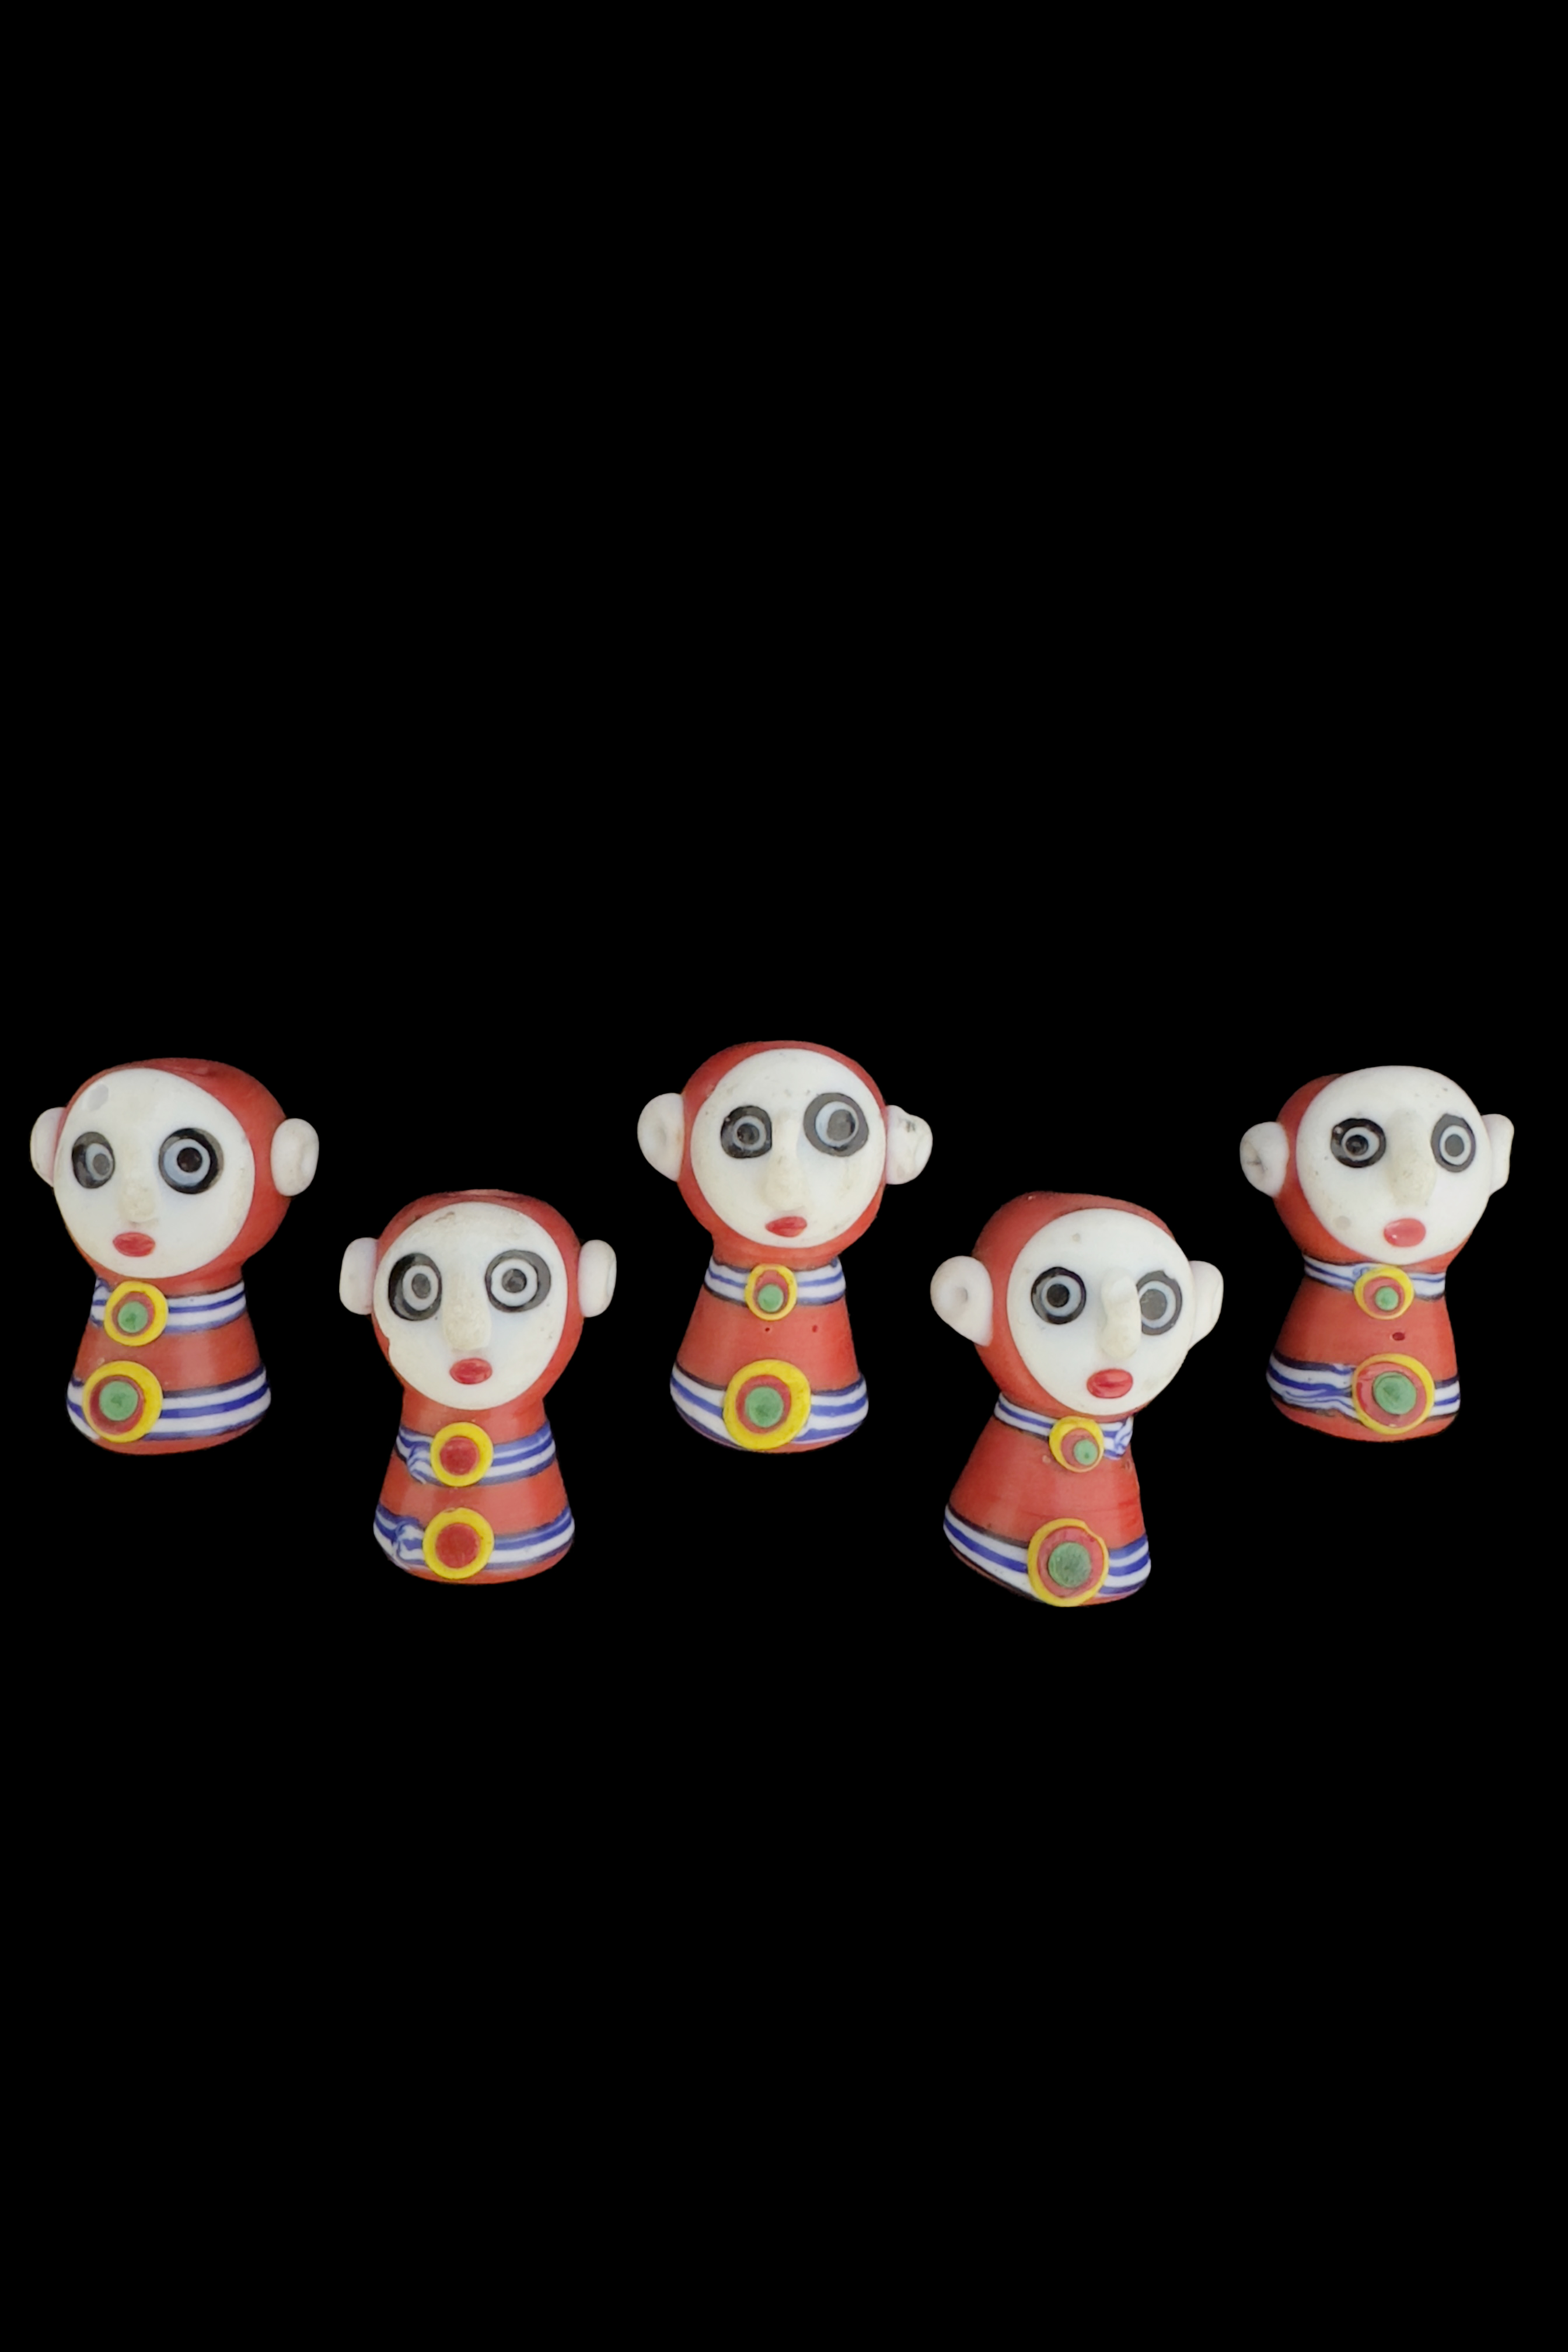 5 Red Glass Beads with White Faces - Java, Indonesia